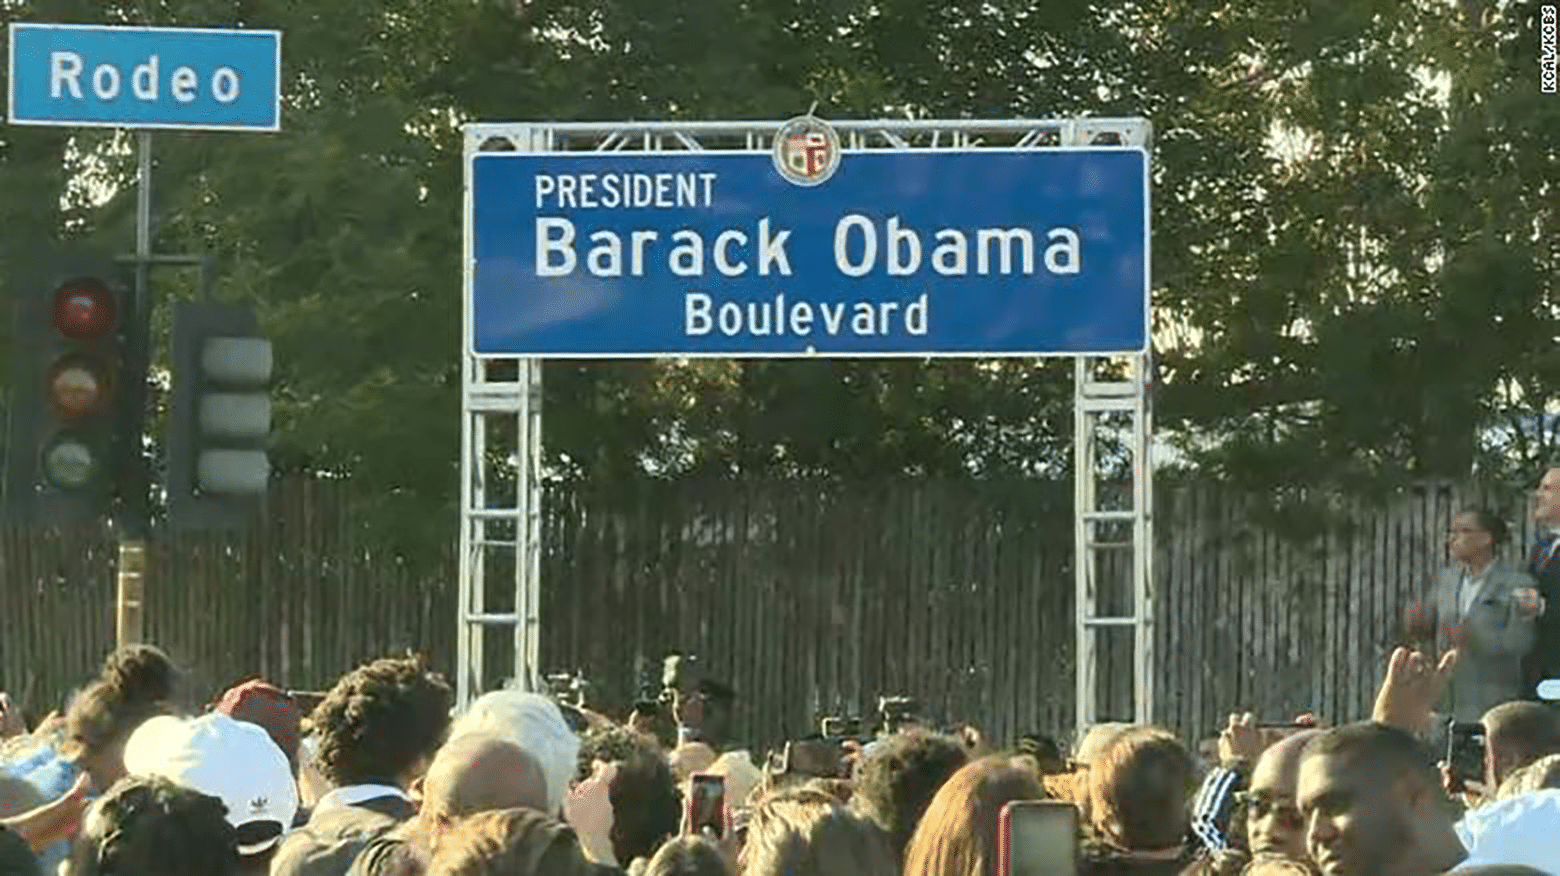 In honor of former President Obama, stretch of road is renamed Obama Boulevard, Mindy's Yummy Sauces, West Bloomfield, Michigan